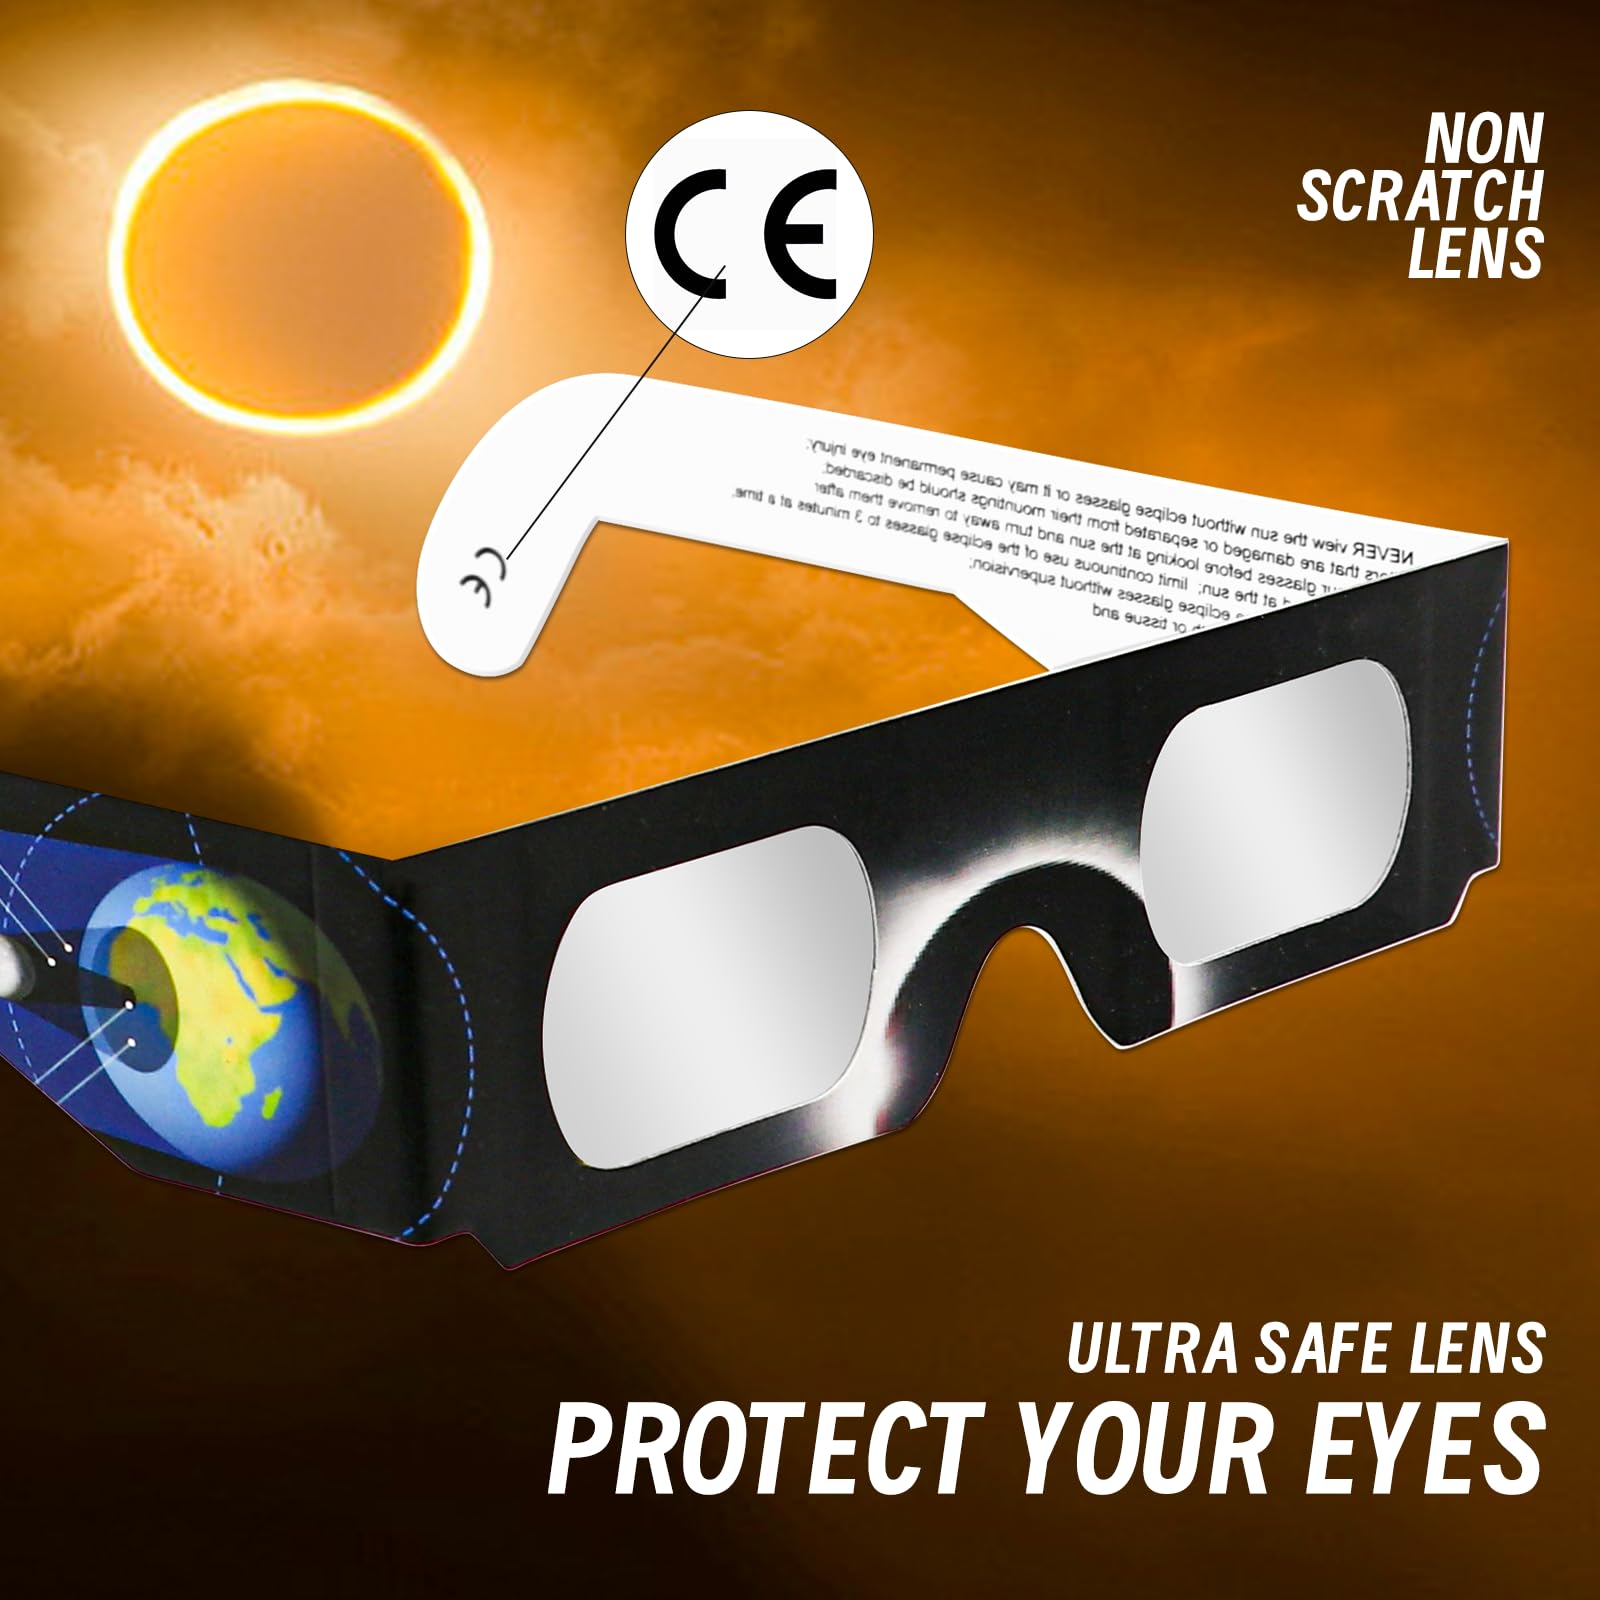 Solar Eclipse Glasses Solar Systems Solar Eclipse Glasses Meet the Standards of the ICS Laboratory, CE and ISO Certified Safe Shades.